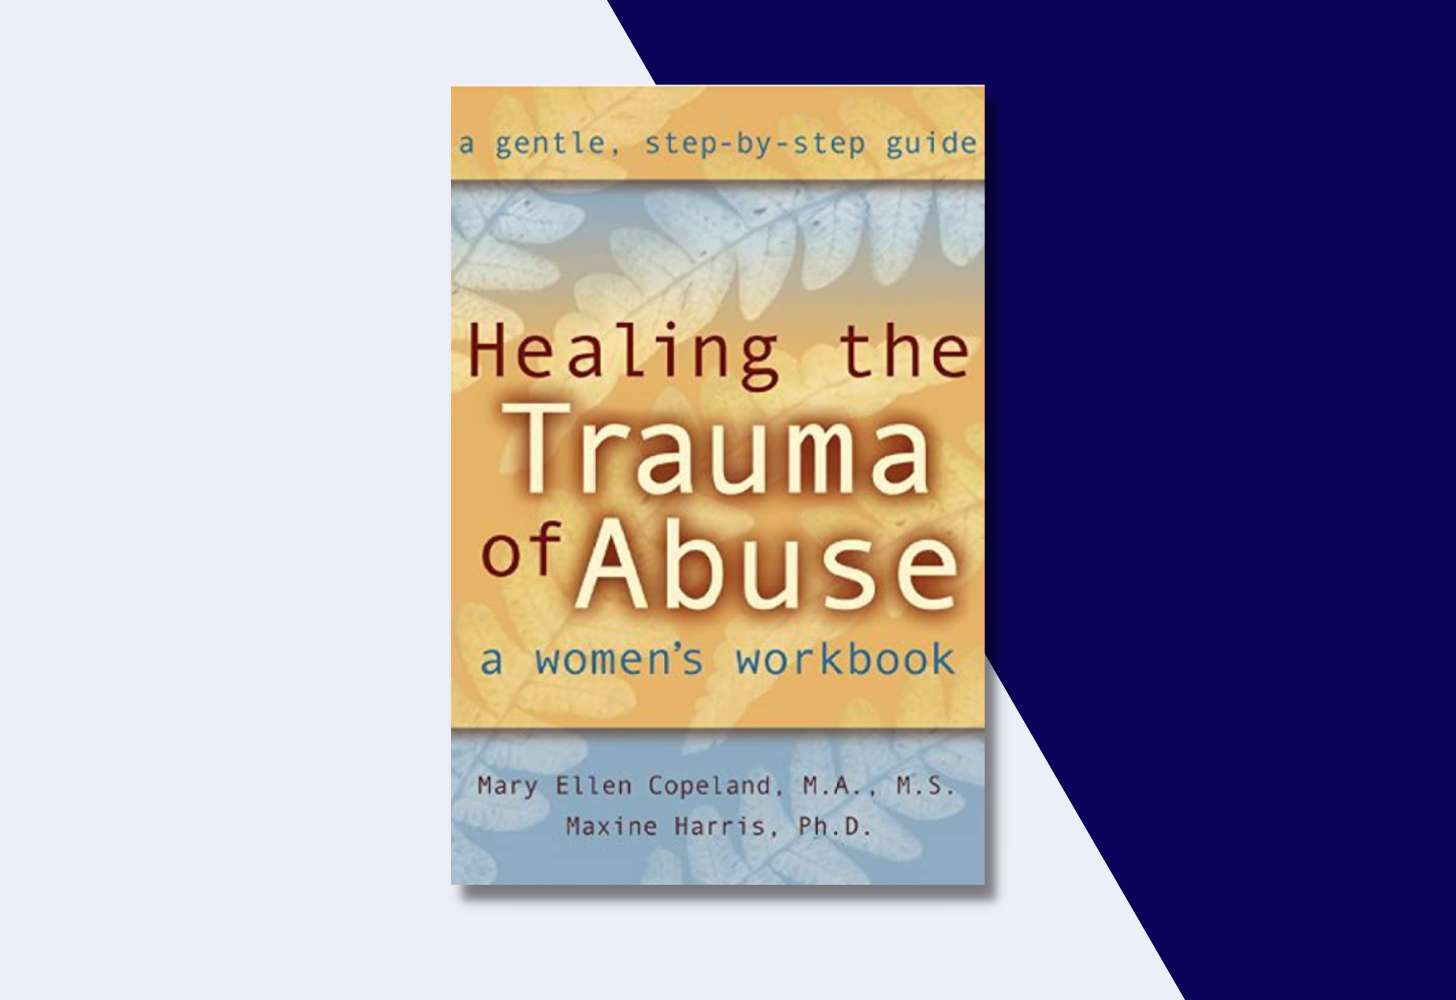 Book cover of Healing the Trauma of Abuse by Mary Ellen Copeland and Maxine Harris